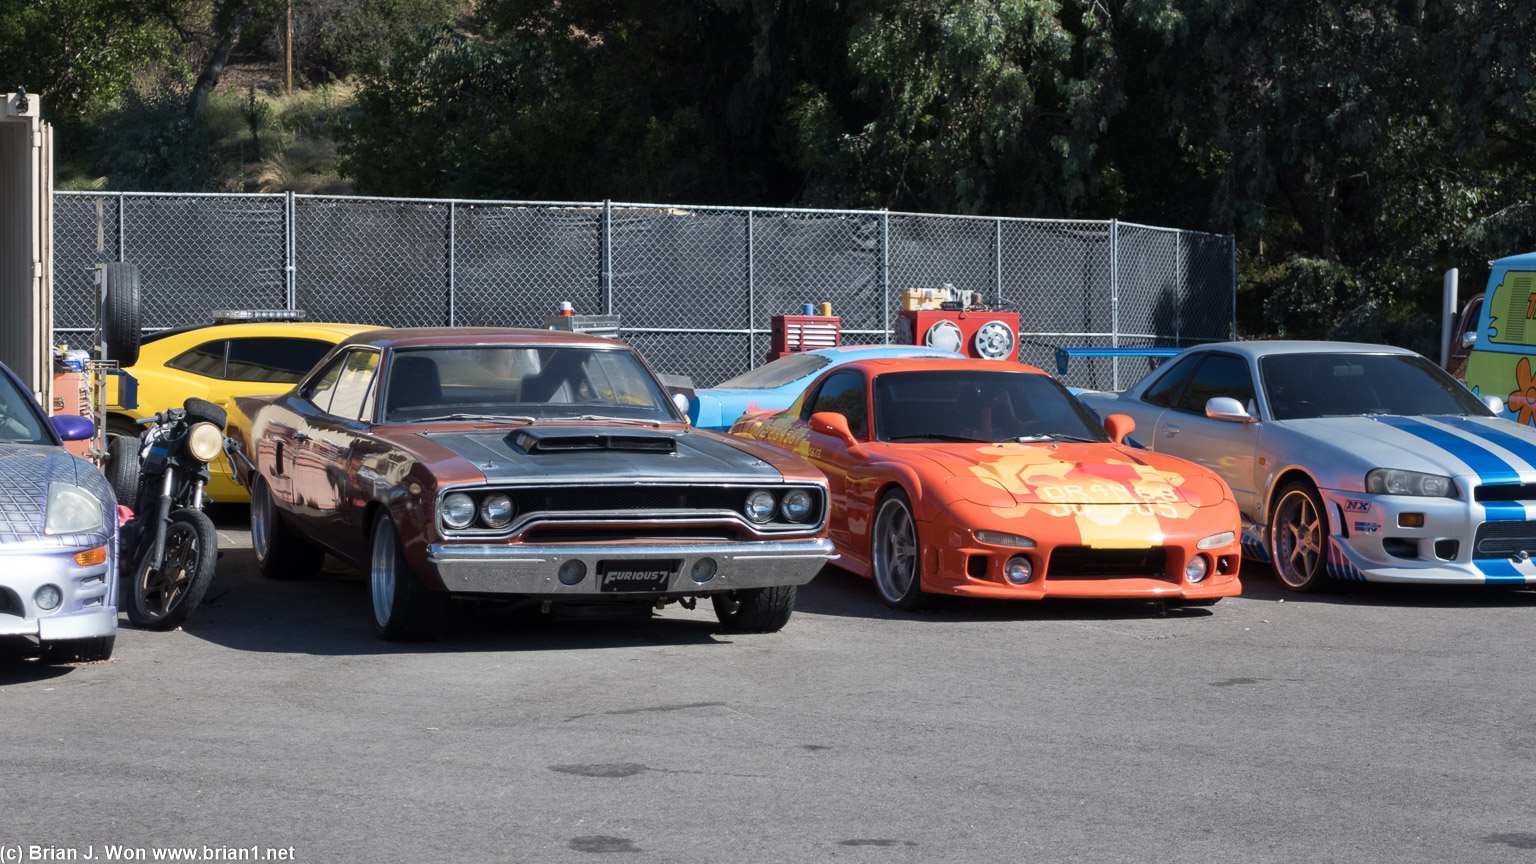 The Fast and Furious cars in the back lot.